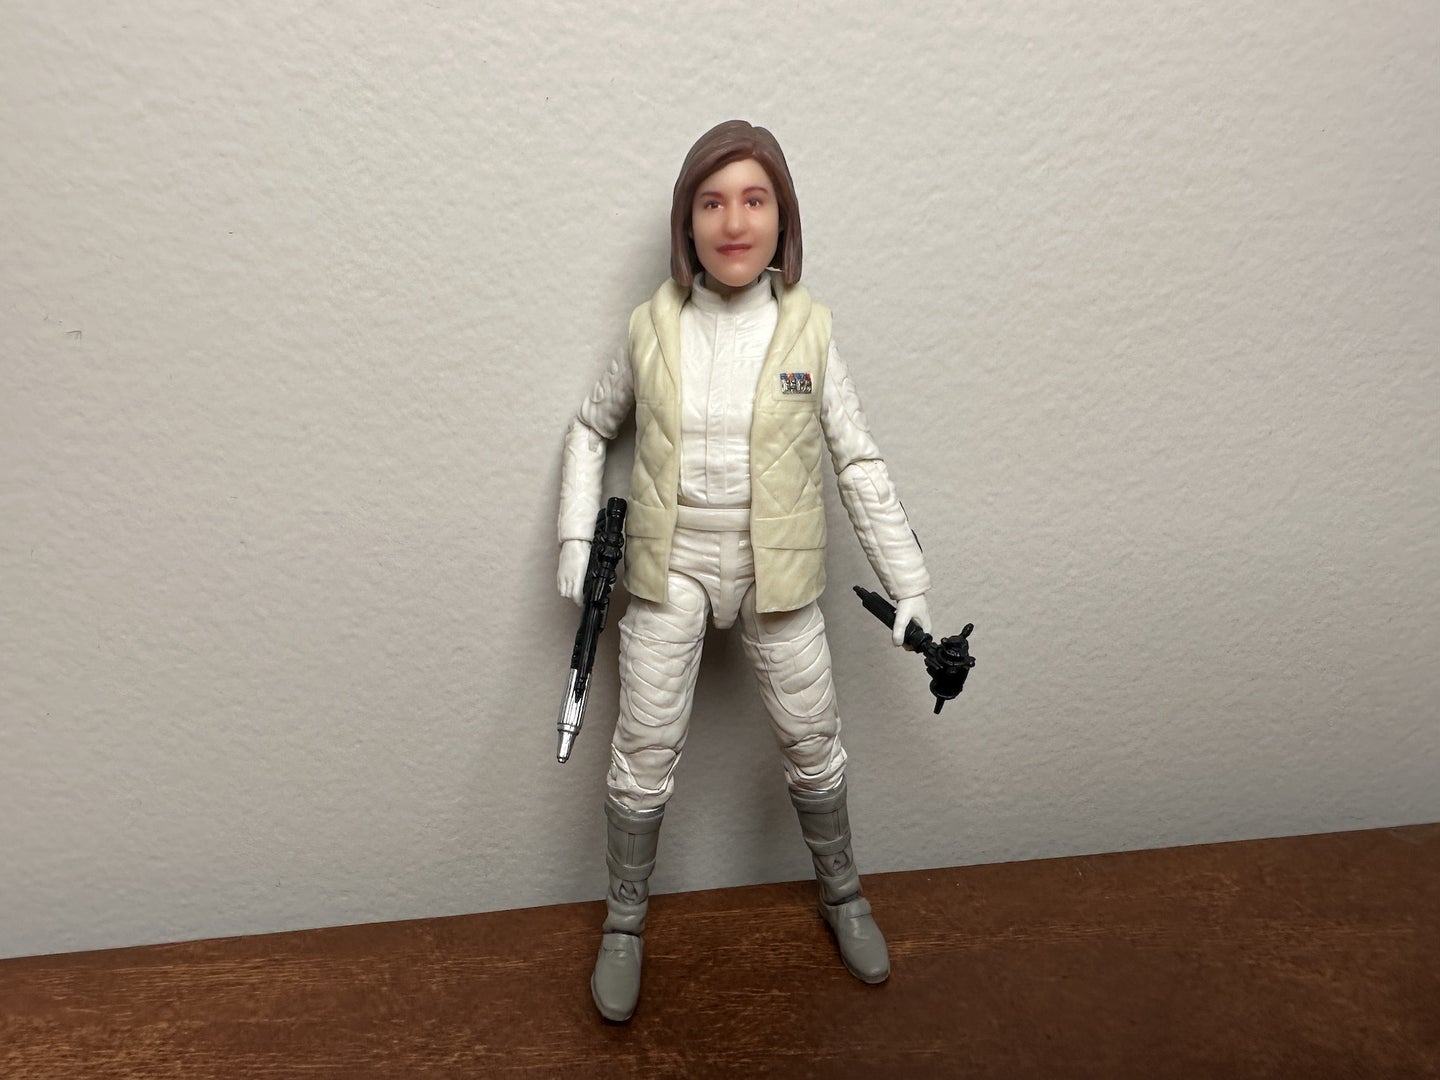 a star wars action figure